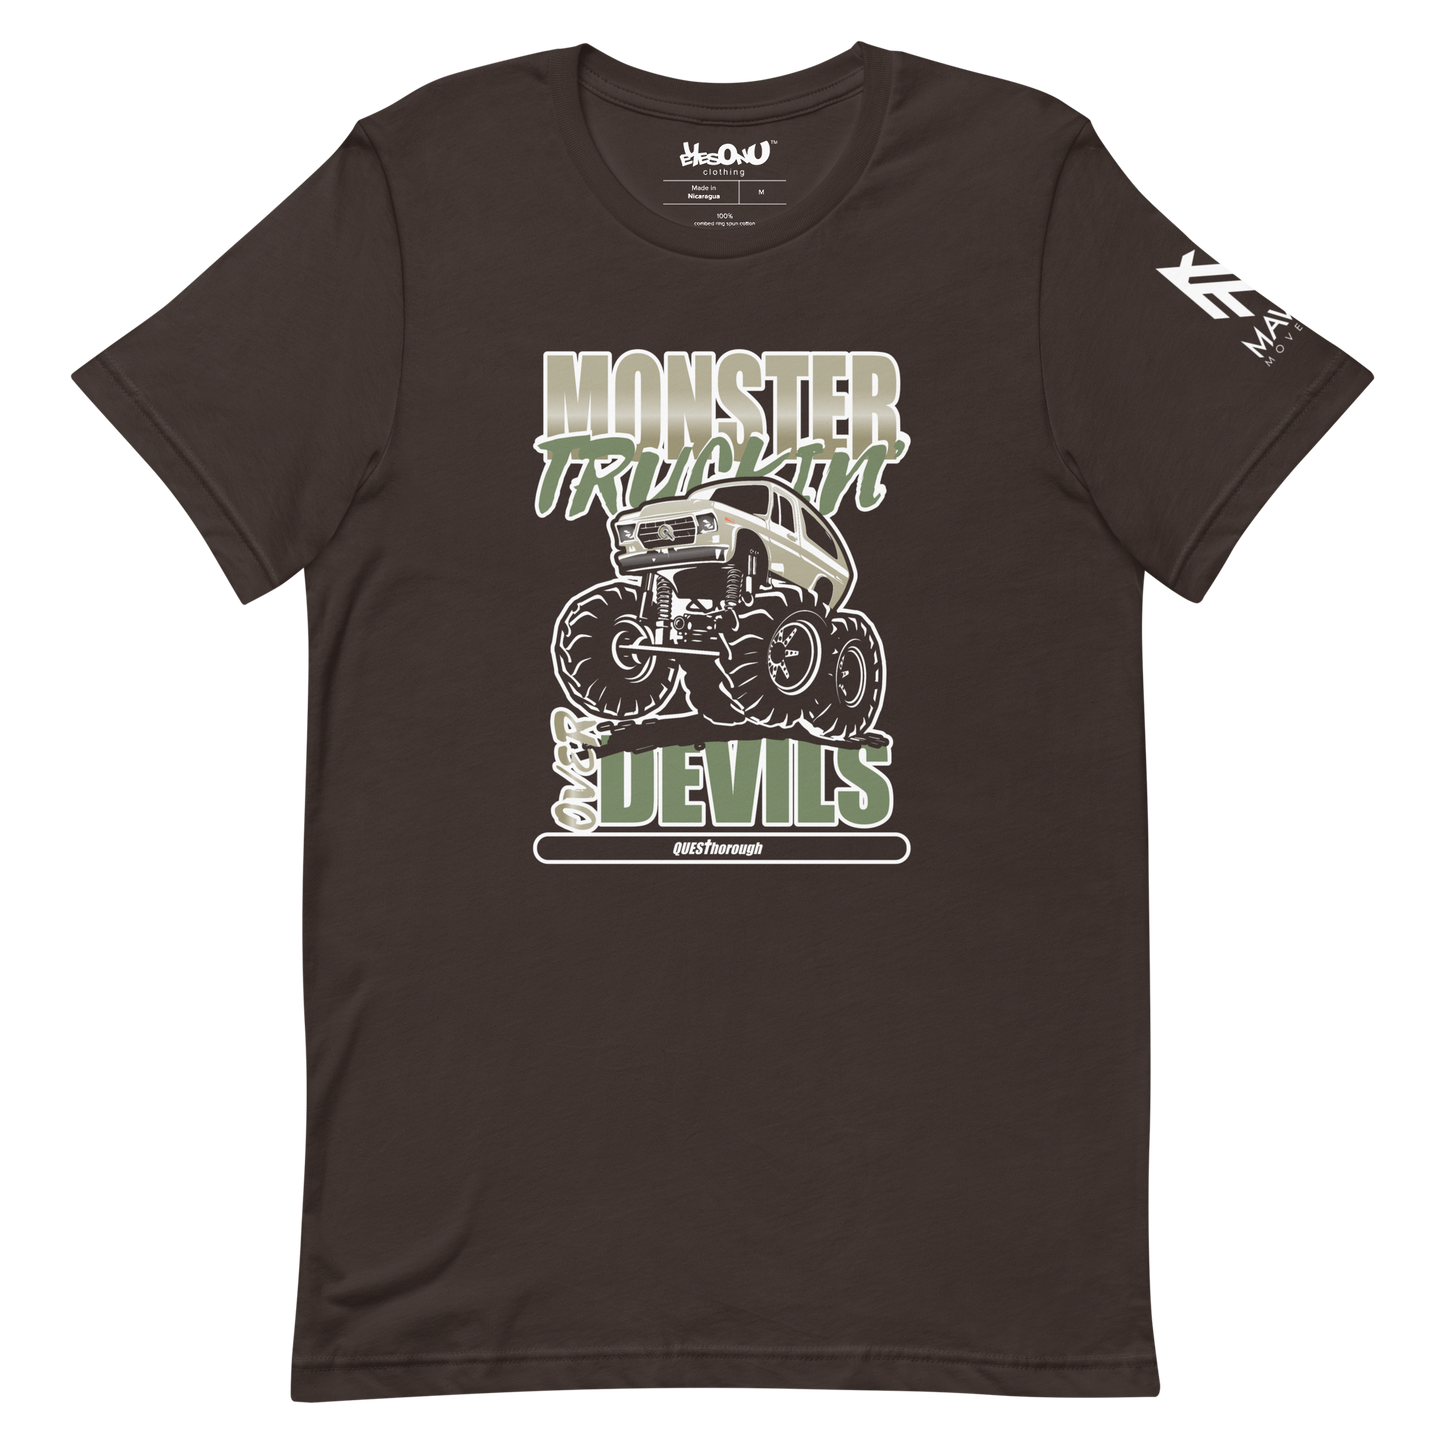 Bars - Monster Truckin' (Army) T-Shirt (4 colors)